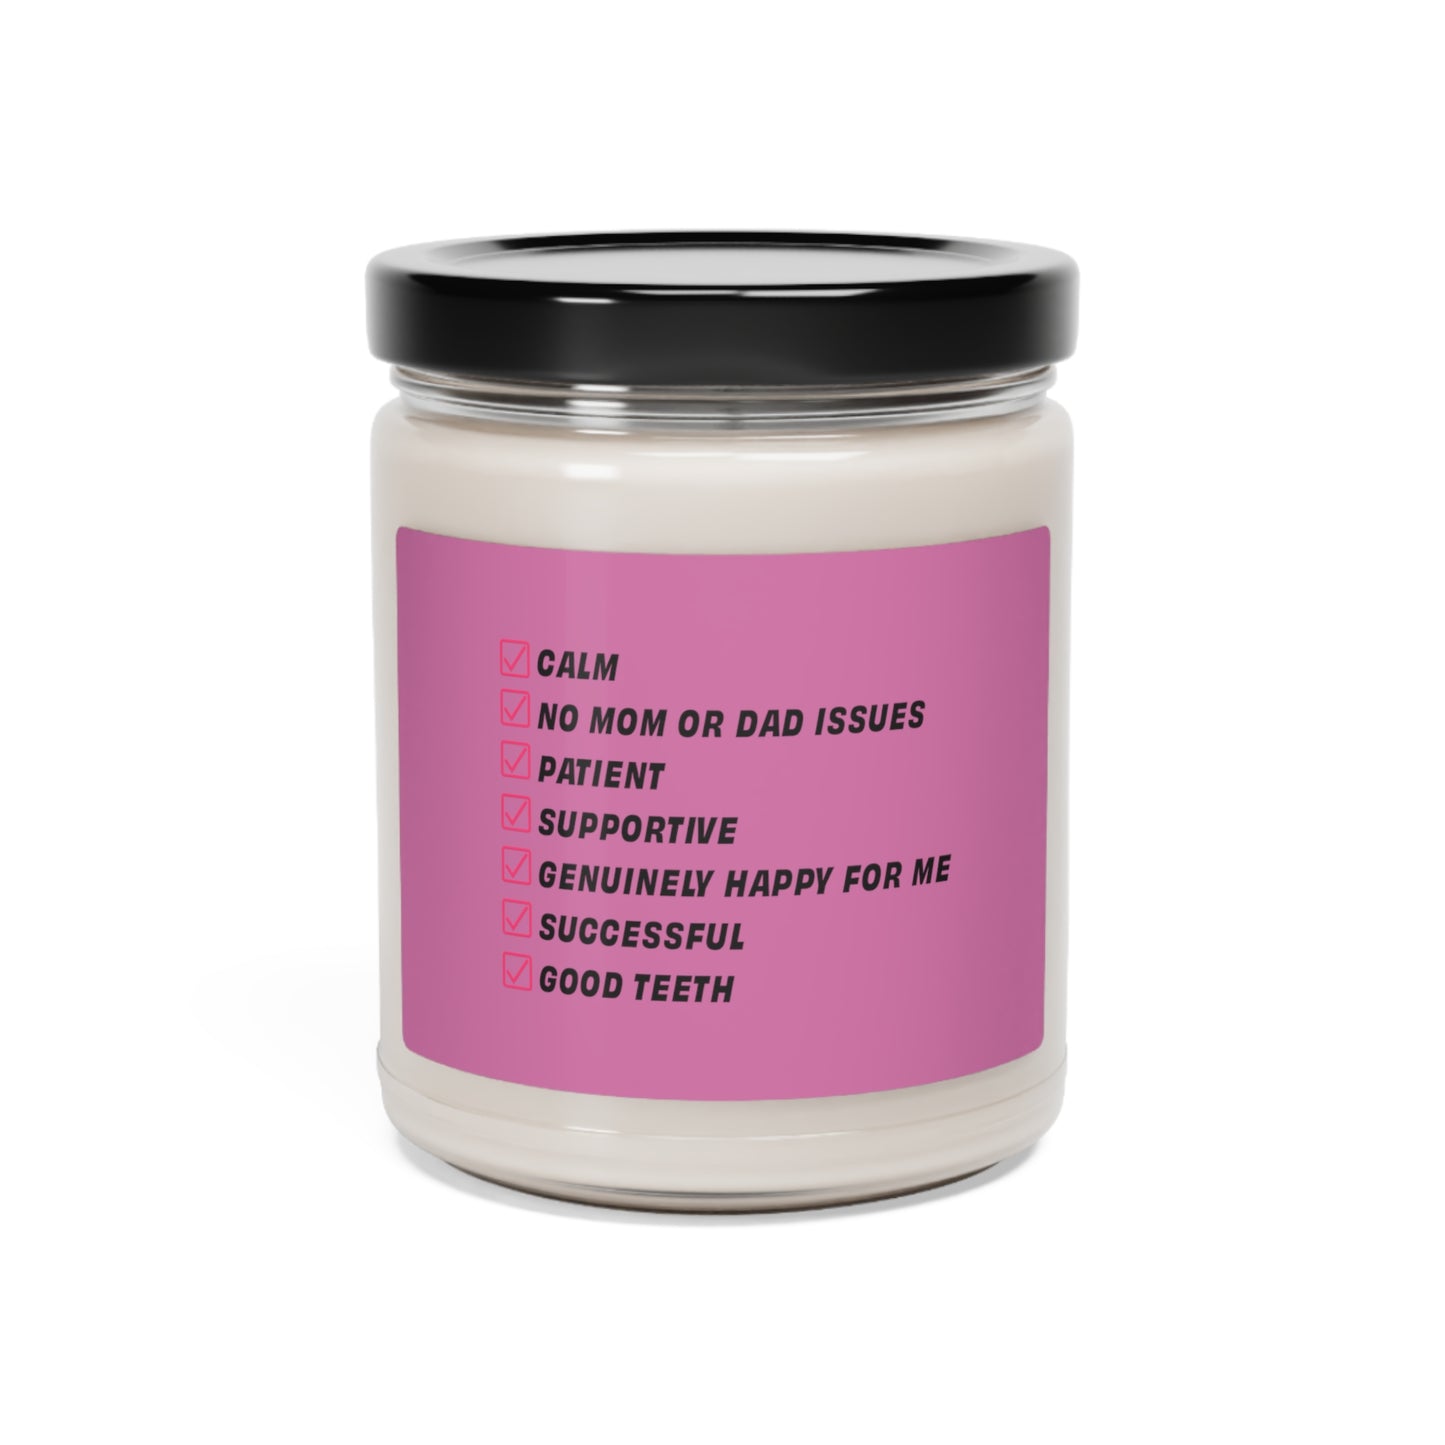 KK’s must-have Candle